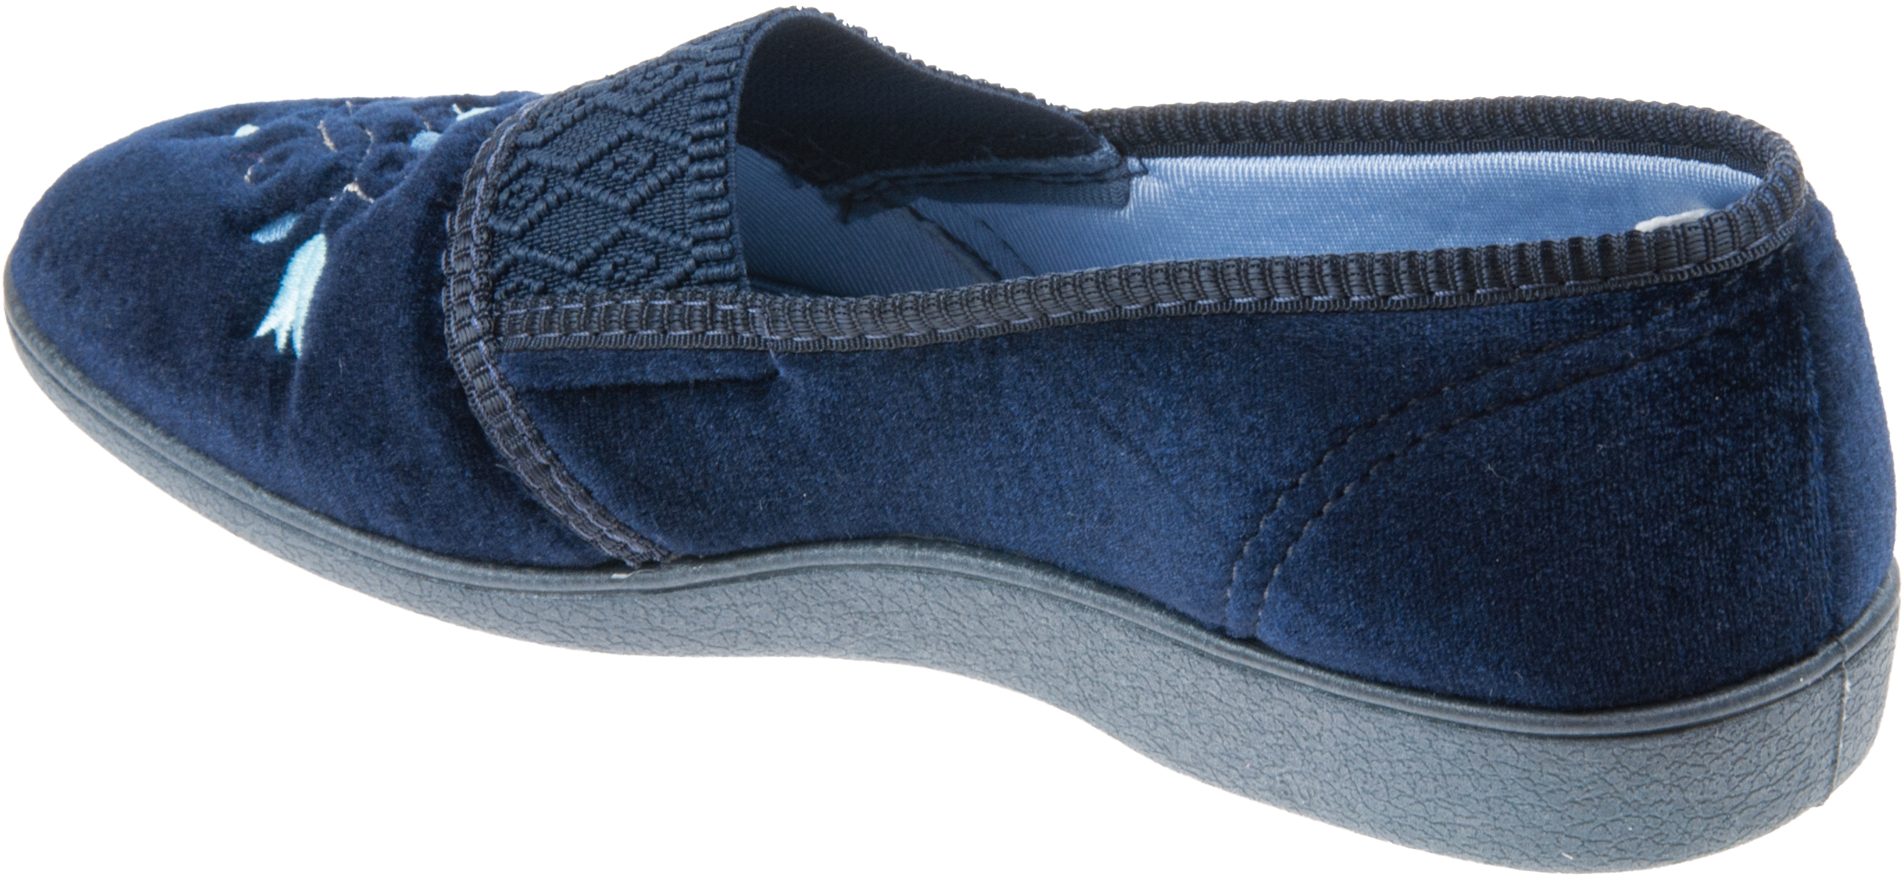 Sleepers Inez Navy Blue LS792 c - Full Slippers - Humphries Shoes